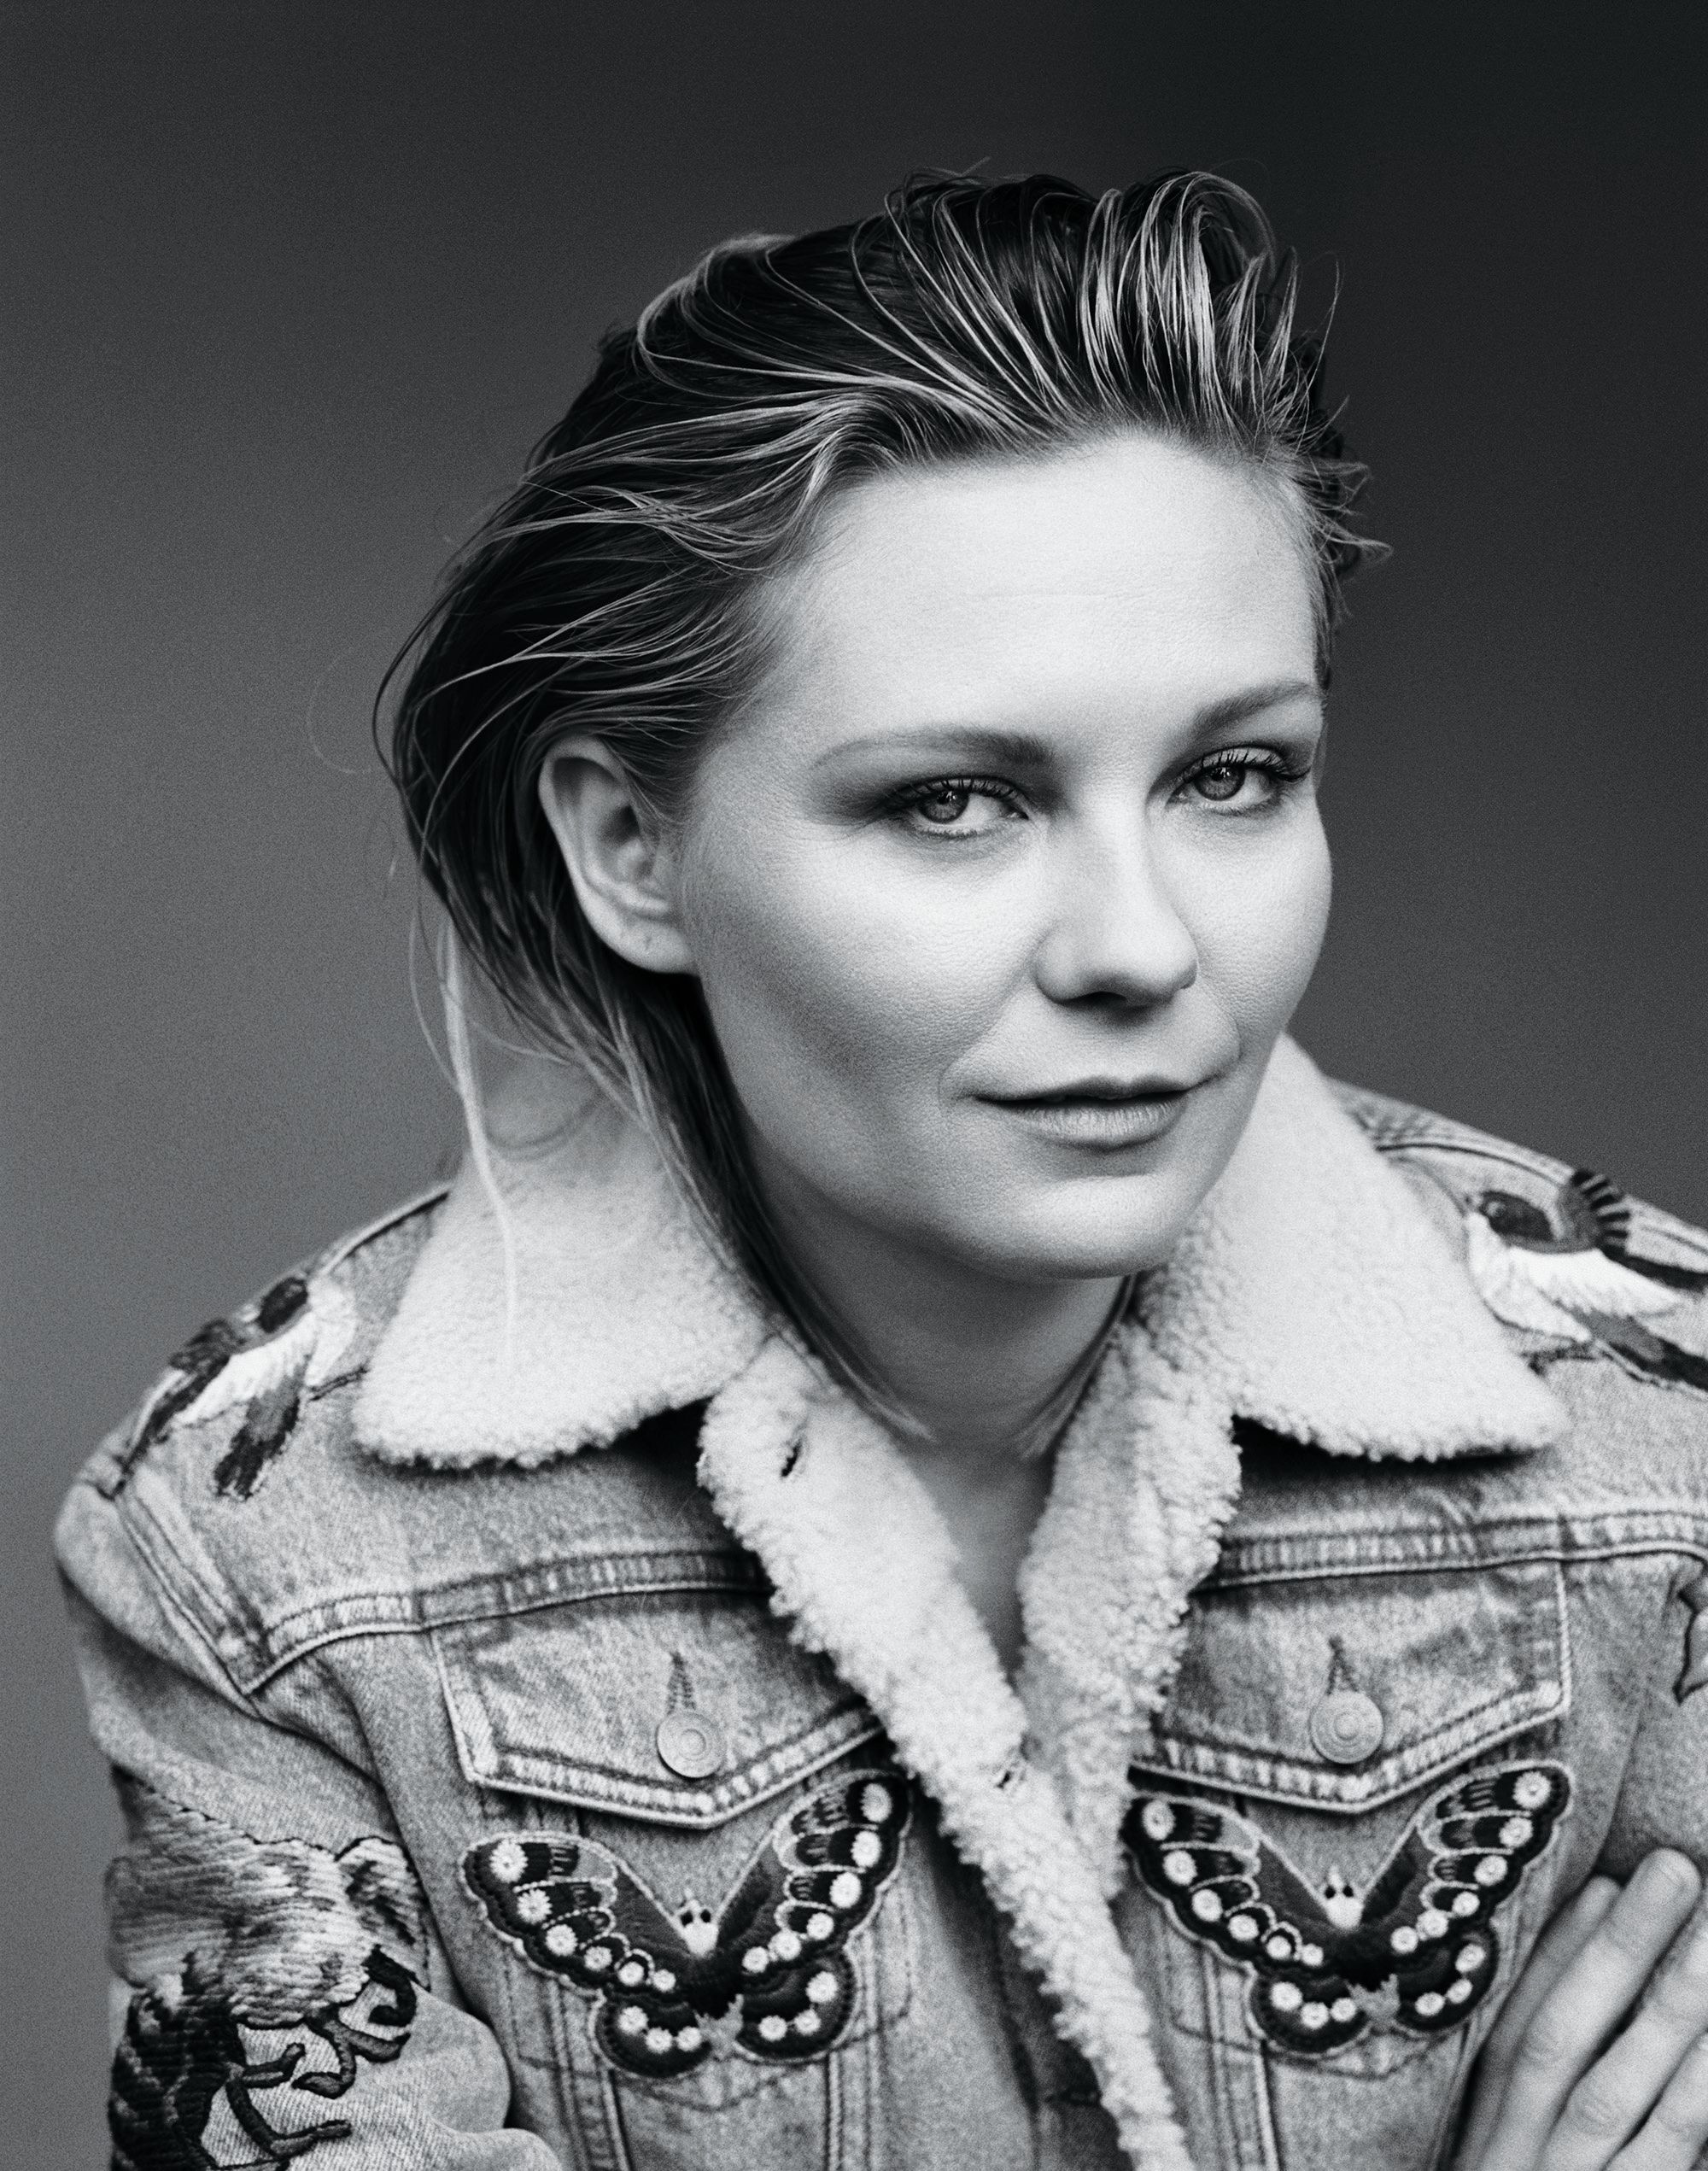 Kirsten Dunst smiles enigmatically at the camera in the this black and white image.